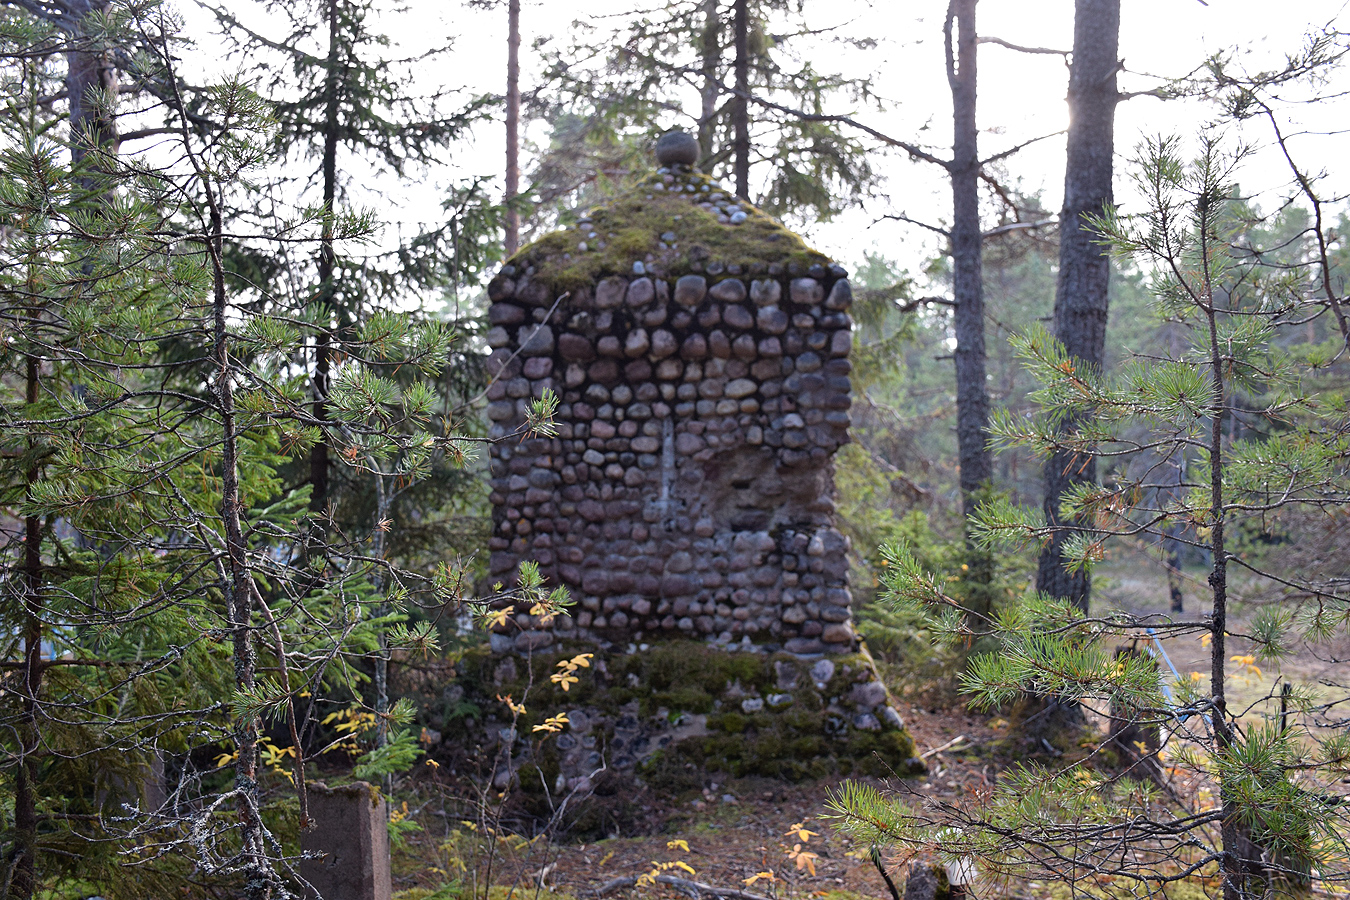 October 26, 2019. Tulema. Monument to the heroes of 1918 on the mass grave in the Orthodox cemetery